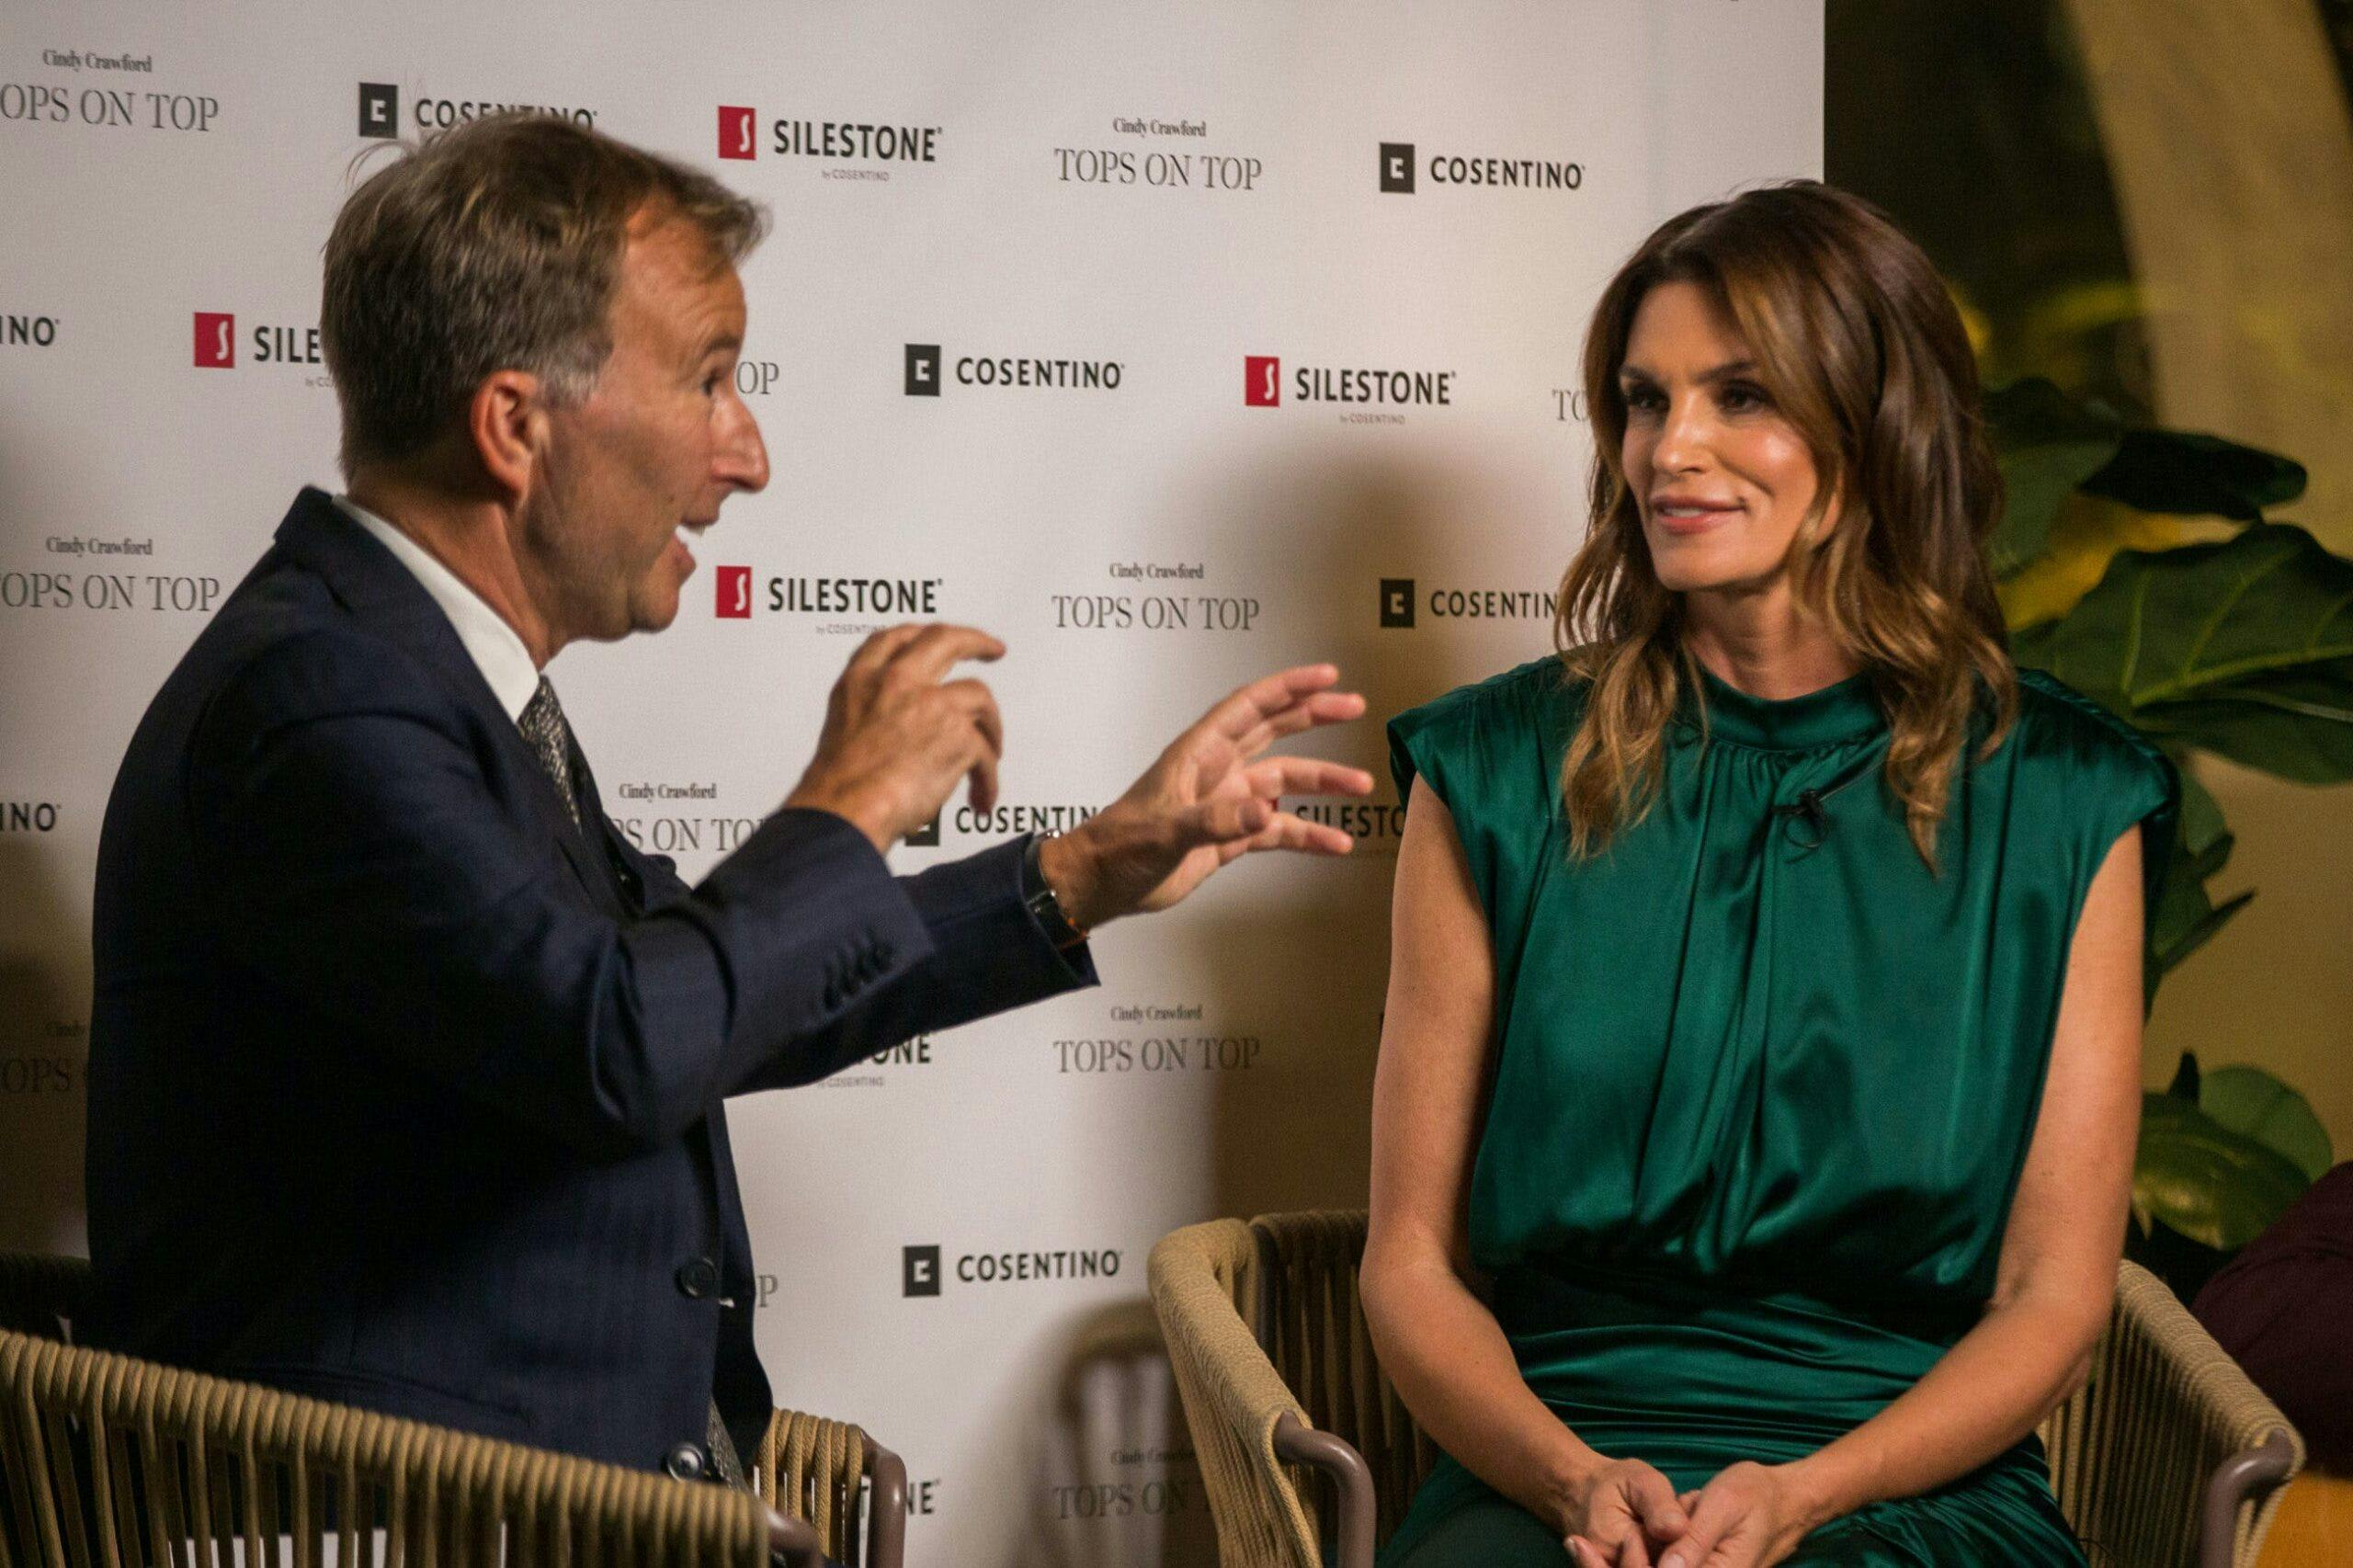 Image 34 of Tony Chambers y Cindy Crawford Silestone Londres 3 scaled in Silestone® Presents its New "Tops on Top 2019" Campaign Featuring Cindy Crawford - Cosentino